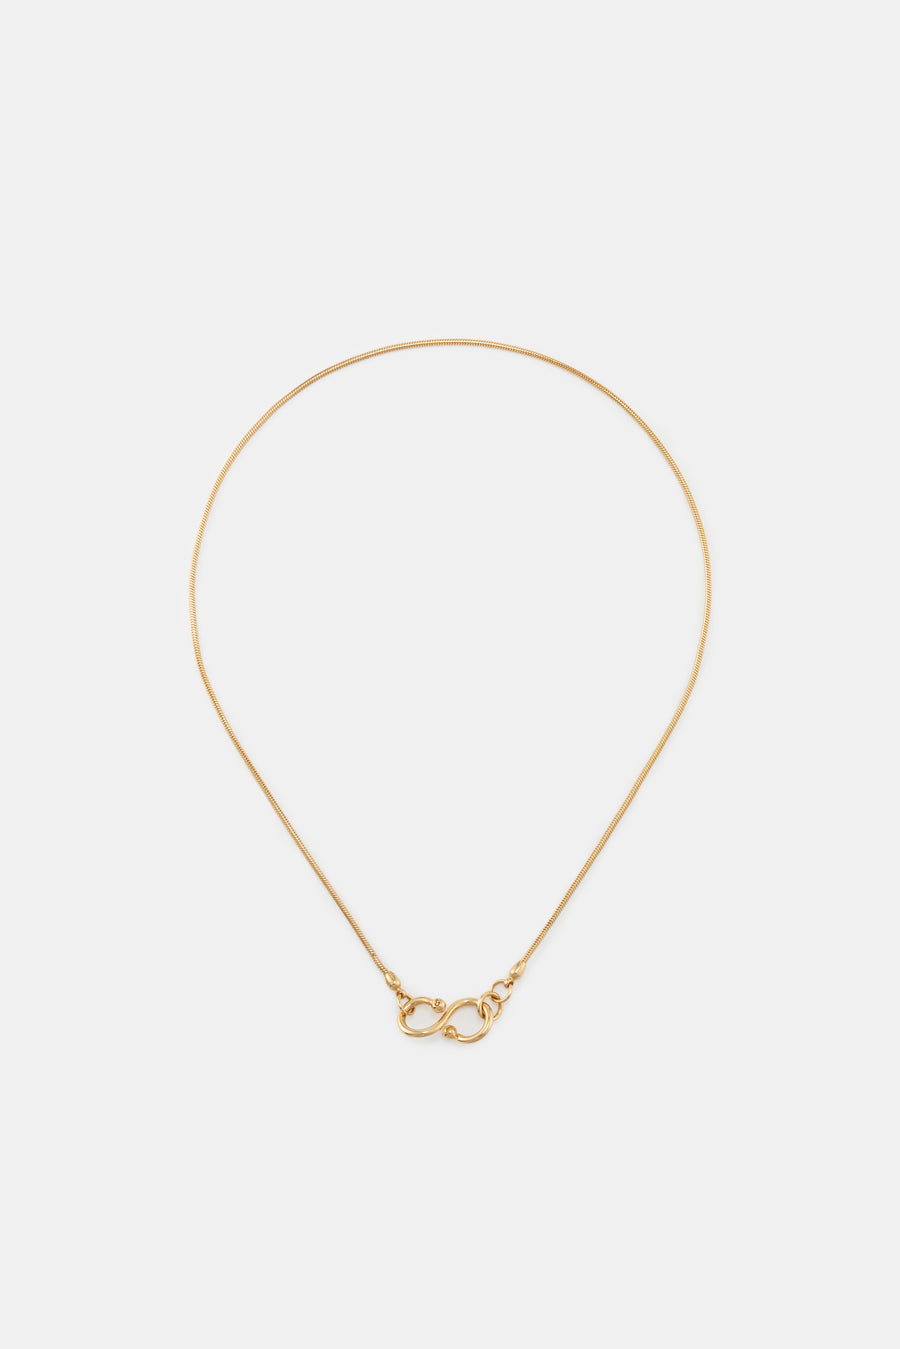 INES 08 NECKLACE GOLD